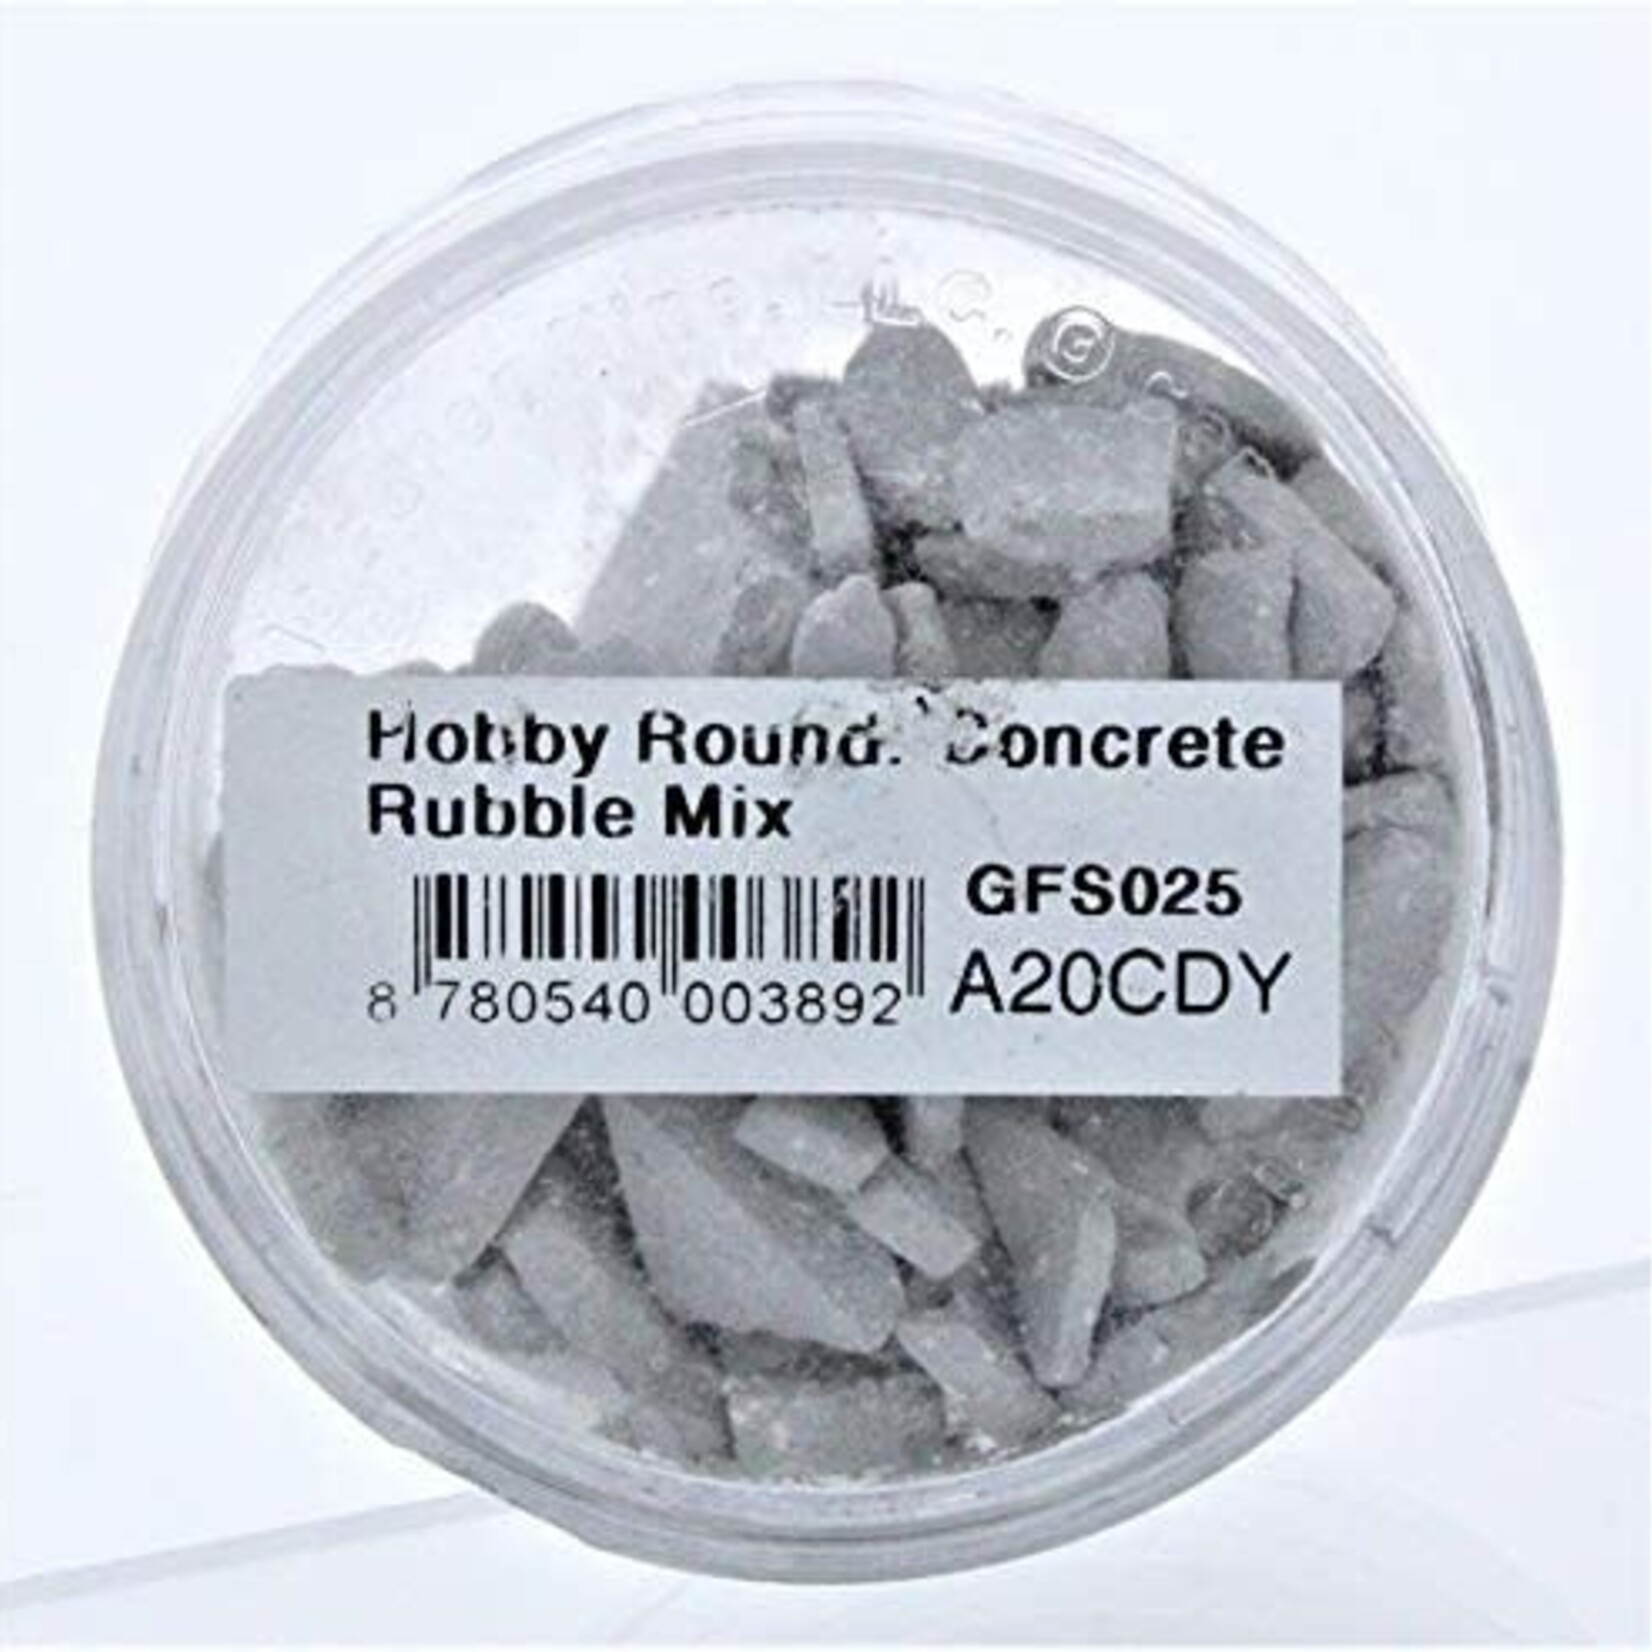 Gale Force 9 Hobby Round: Concrete Rubble Mix